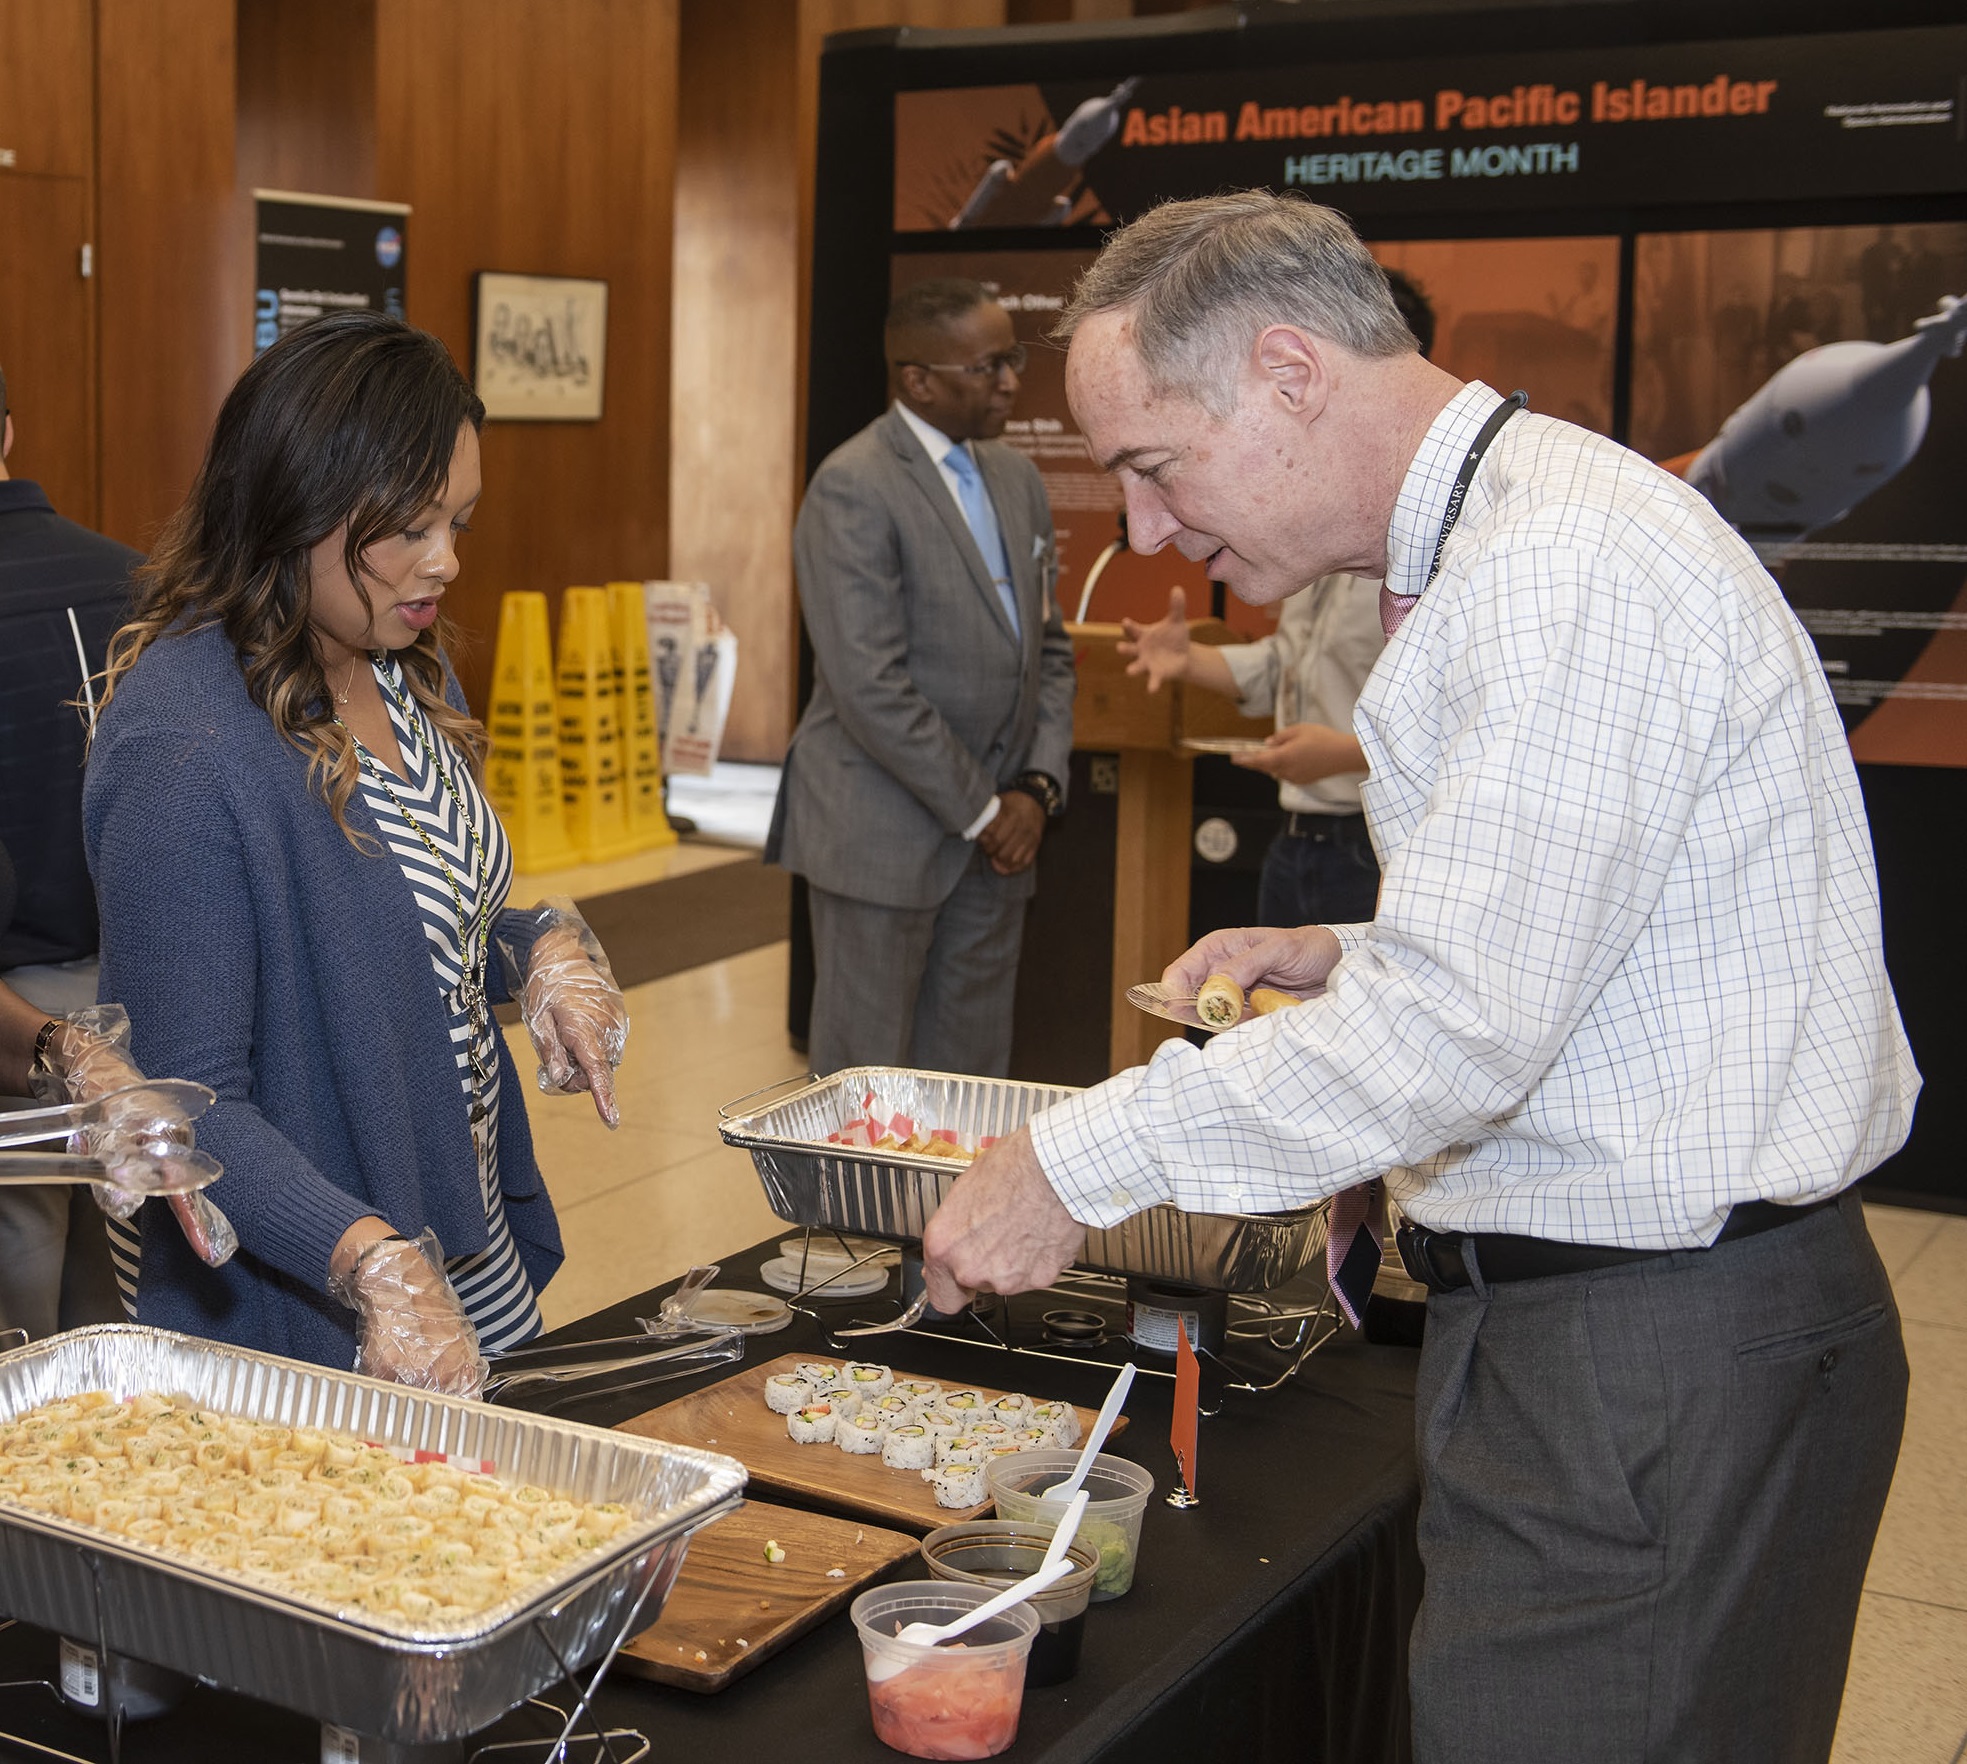 Jennifer Patton, left, serves traditional Thai cuisine to James Frees, deputy chief counsel in the Office of the Chief Counsel.